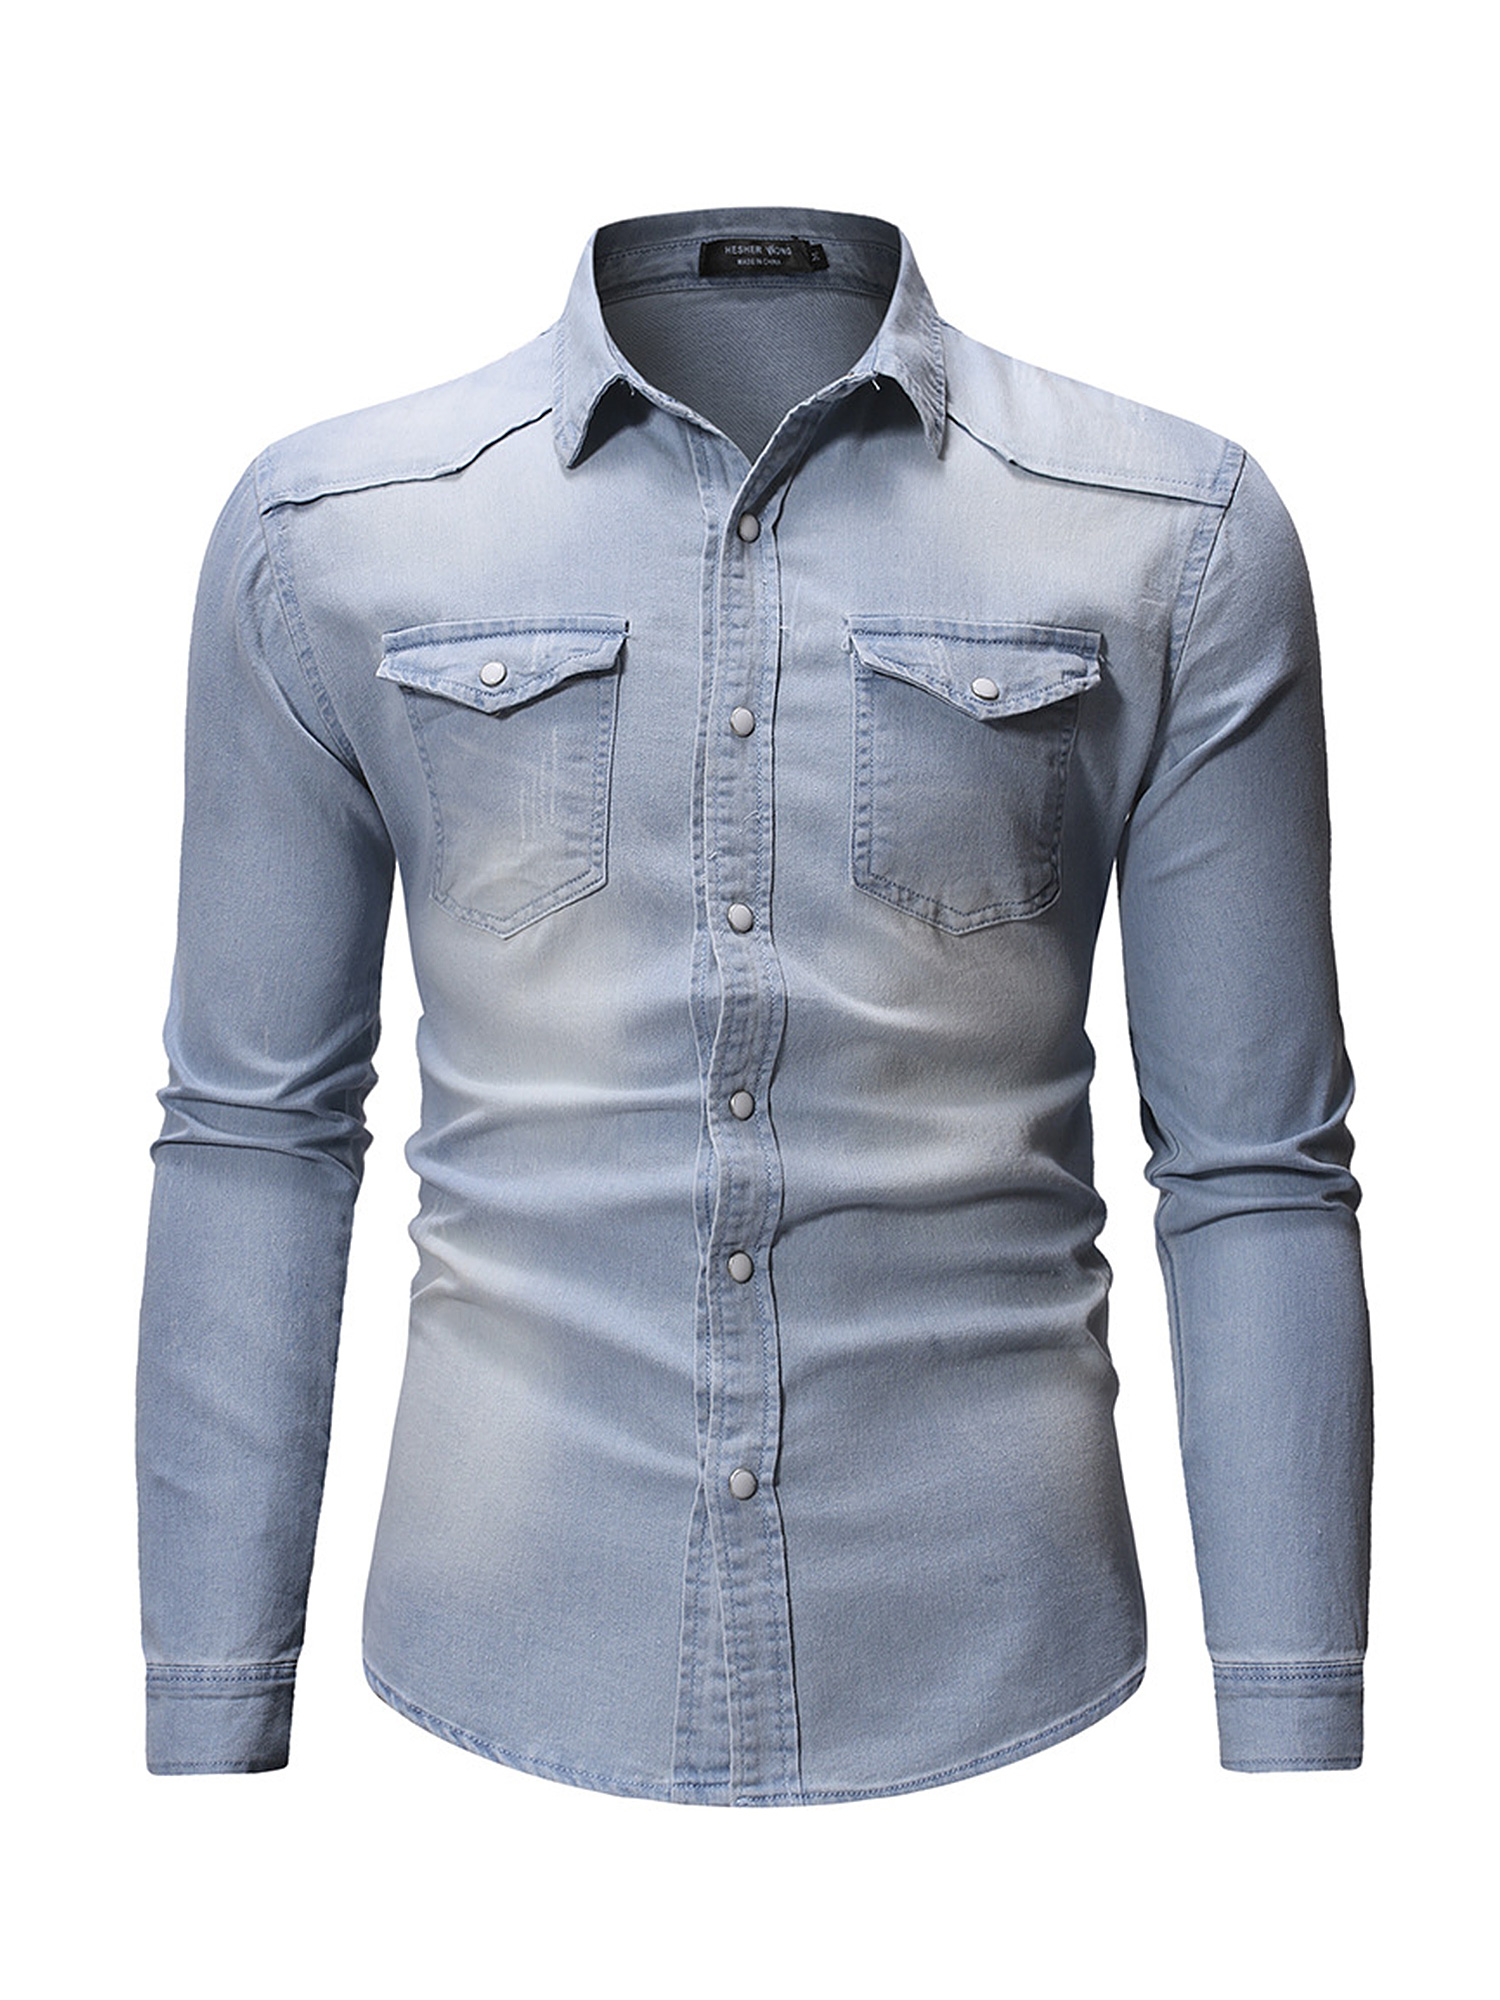 Men's Western Long Sleeve Denim Shirt with Pockets Casual Slim Fit Lapel Tops Button Down Blouse for Winter - image 3 of 4